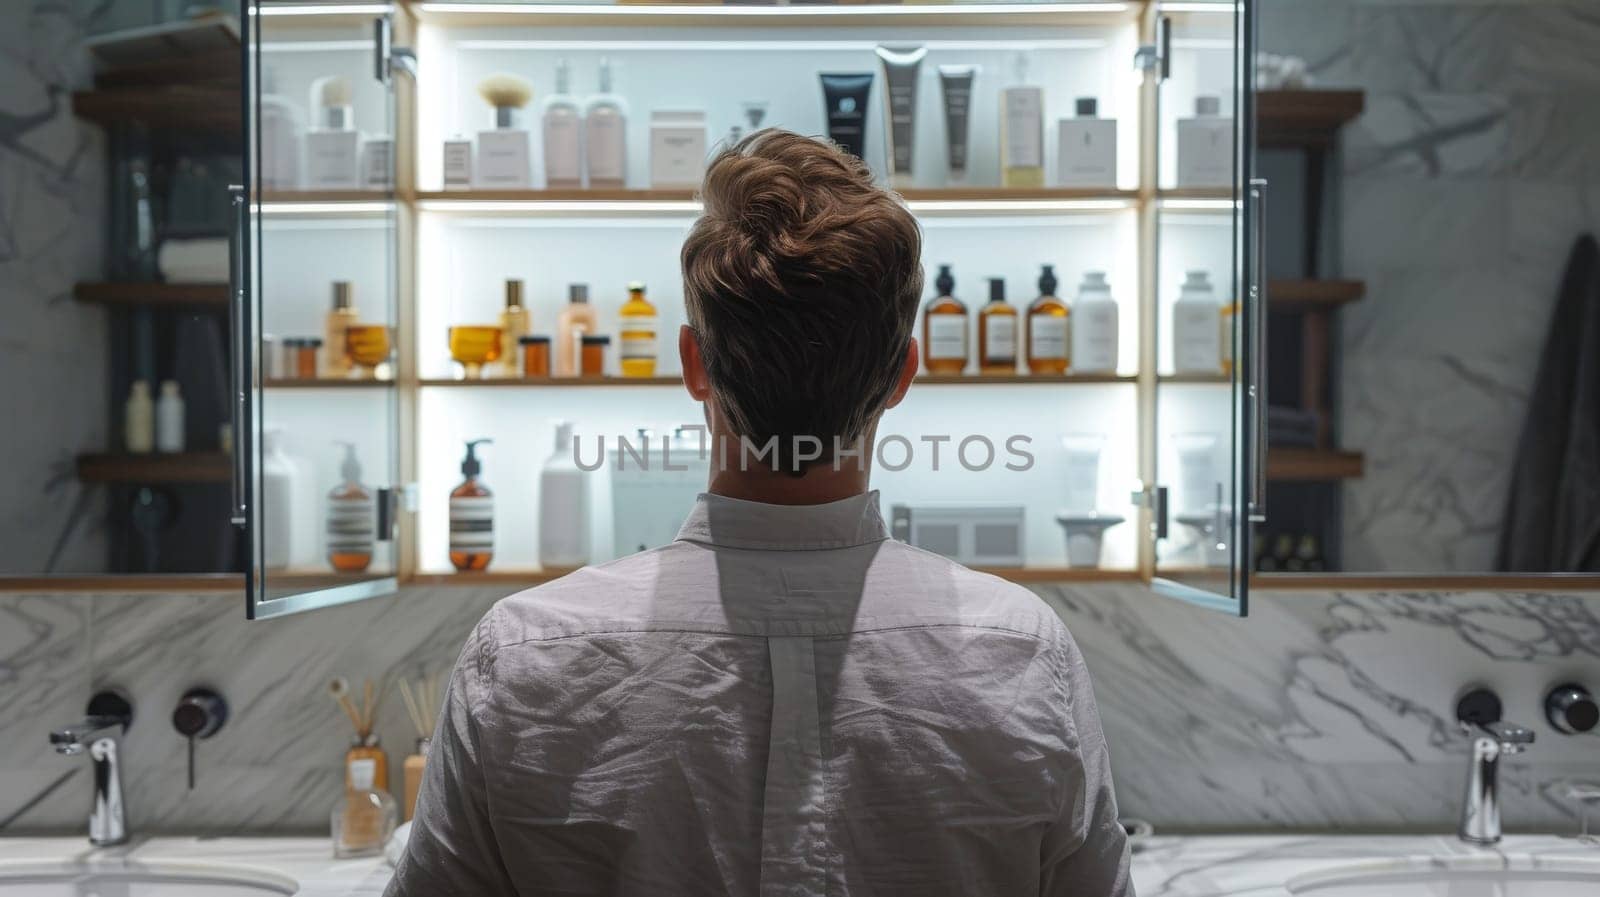 A man is looking at a shelf full of toiletries. Concept of curiosity and contemplation as the man examines the various products on the shelf